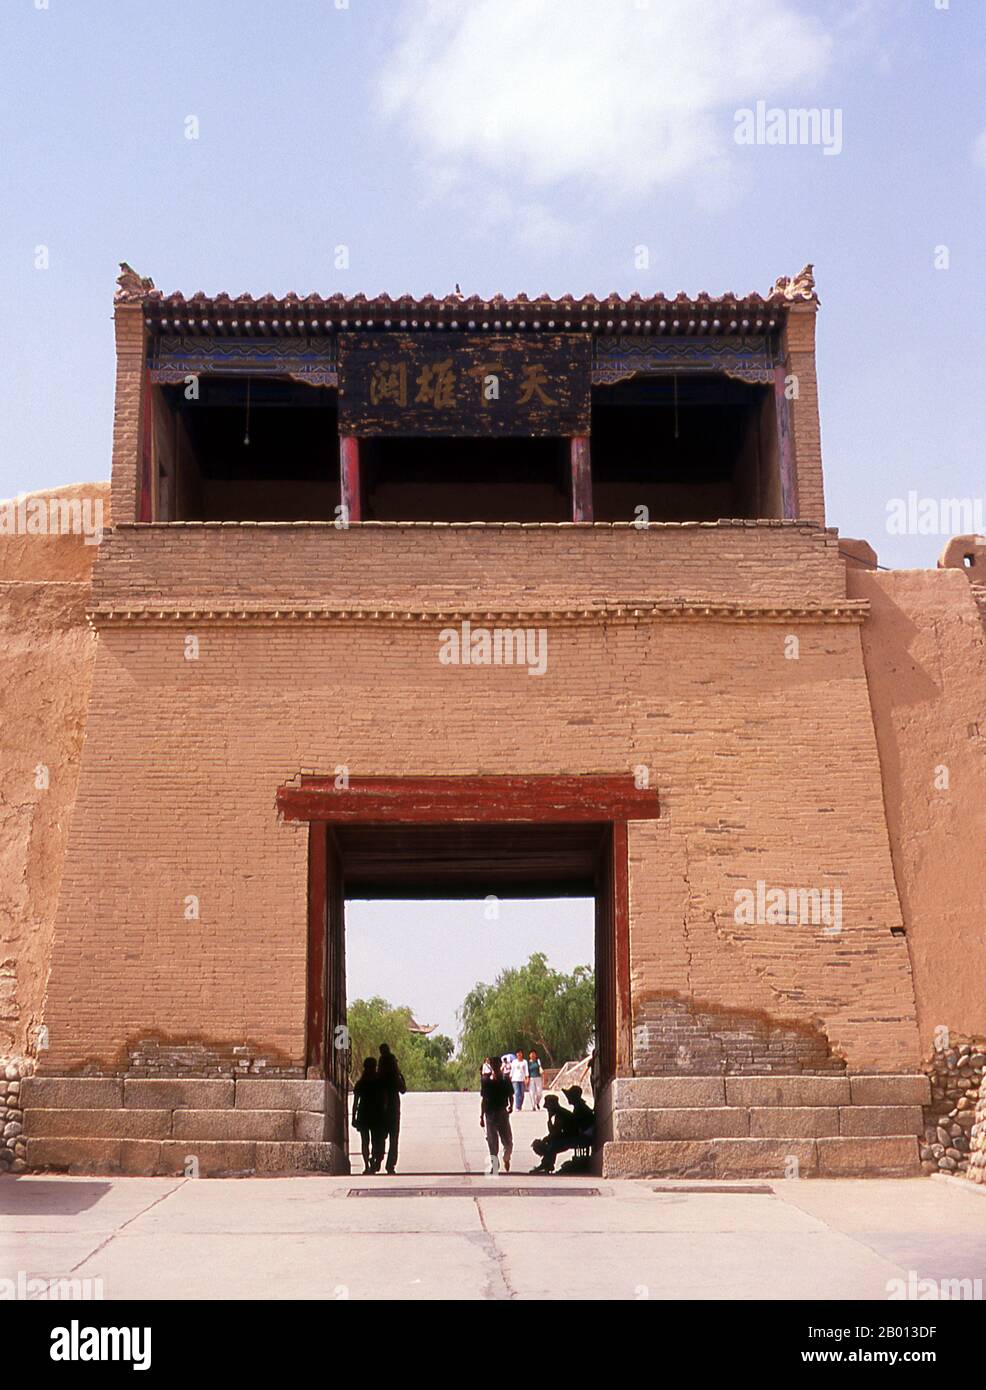 China: Outer wall tower next to the front gate, Jiayuguan Fort, Jiayuguan, Gansu.  Jiayuguan, the ‘First and Greatest Pass under Heaven’, was completed in 1372 on the orders of Zhu Yuanzhang, the first Ming Emperor (1368-1398), to mark the end of the Ming Great Wall. It was also the very limits of Chinese civilisation, and the beginnings of the outer ‘barbarian’ lands. For centuries the fort was not just of strategic importance to Han Chinese, but of cultural significance as well. This was the last civilised place before the outer darkness. Stock Photo